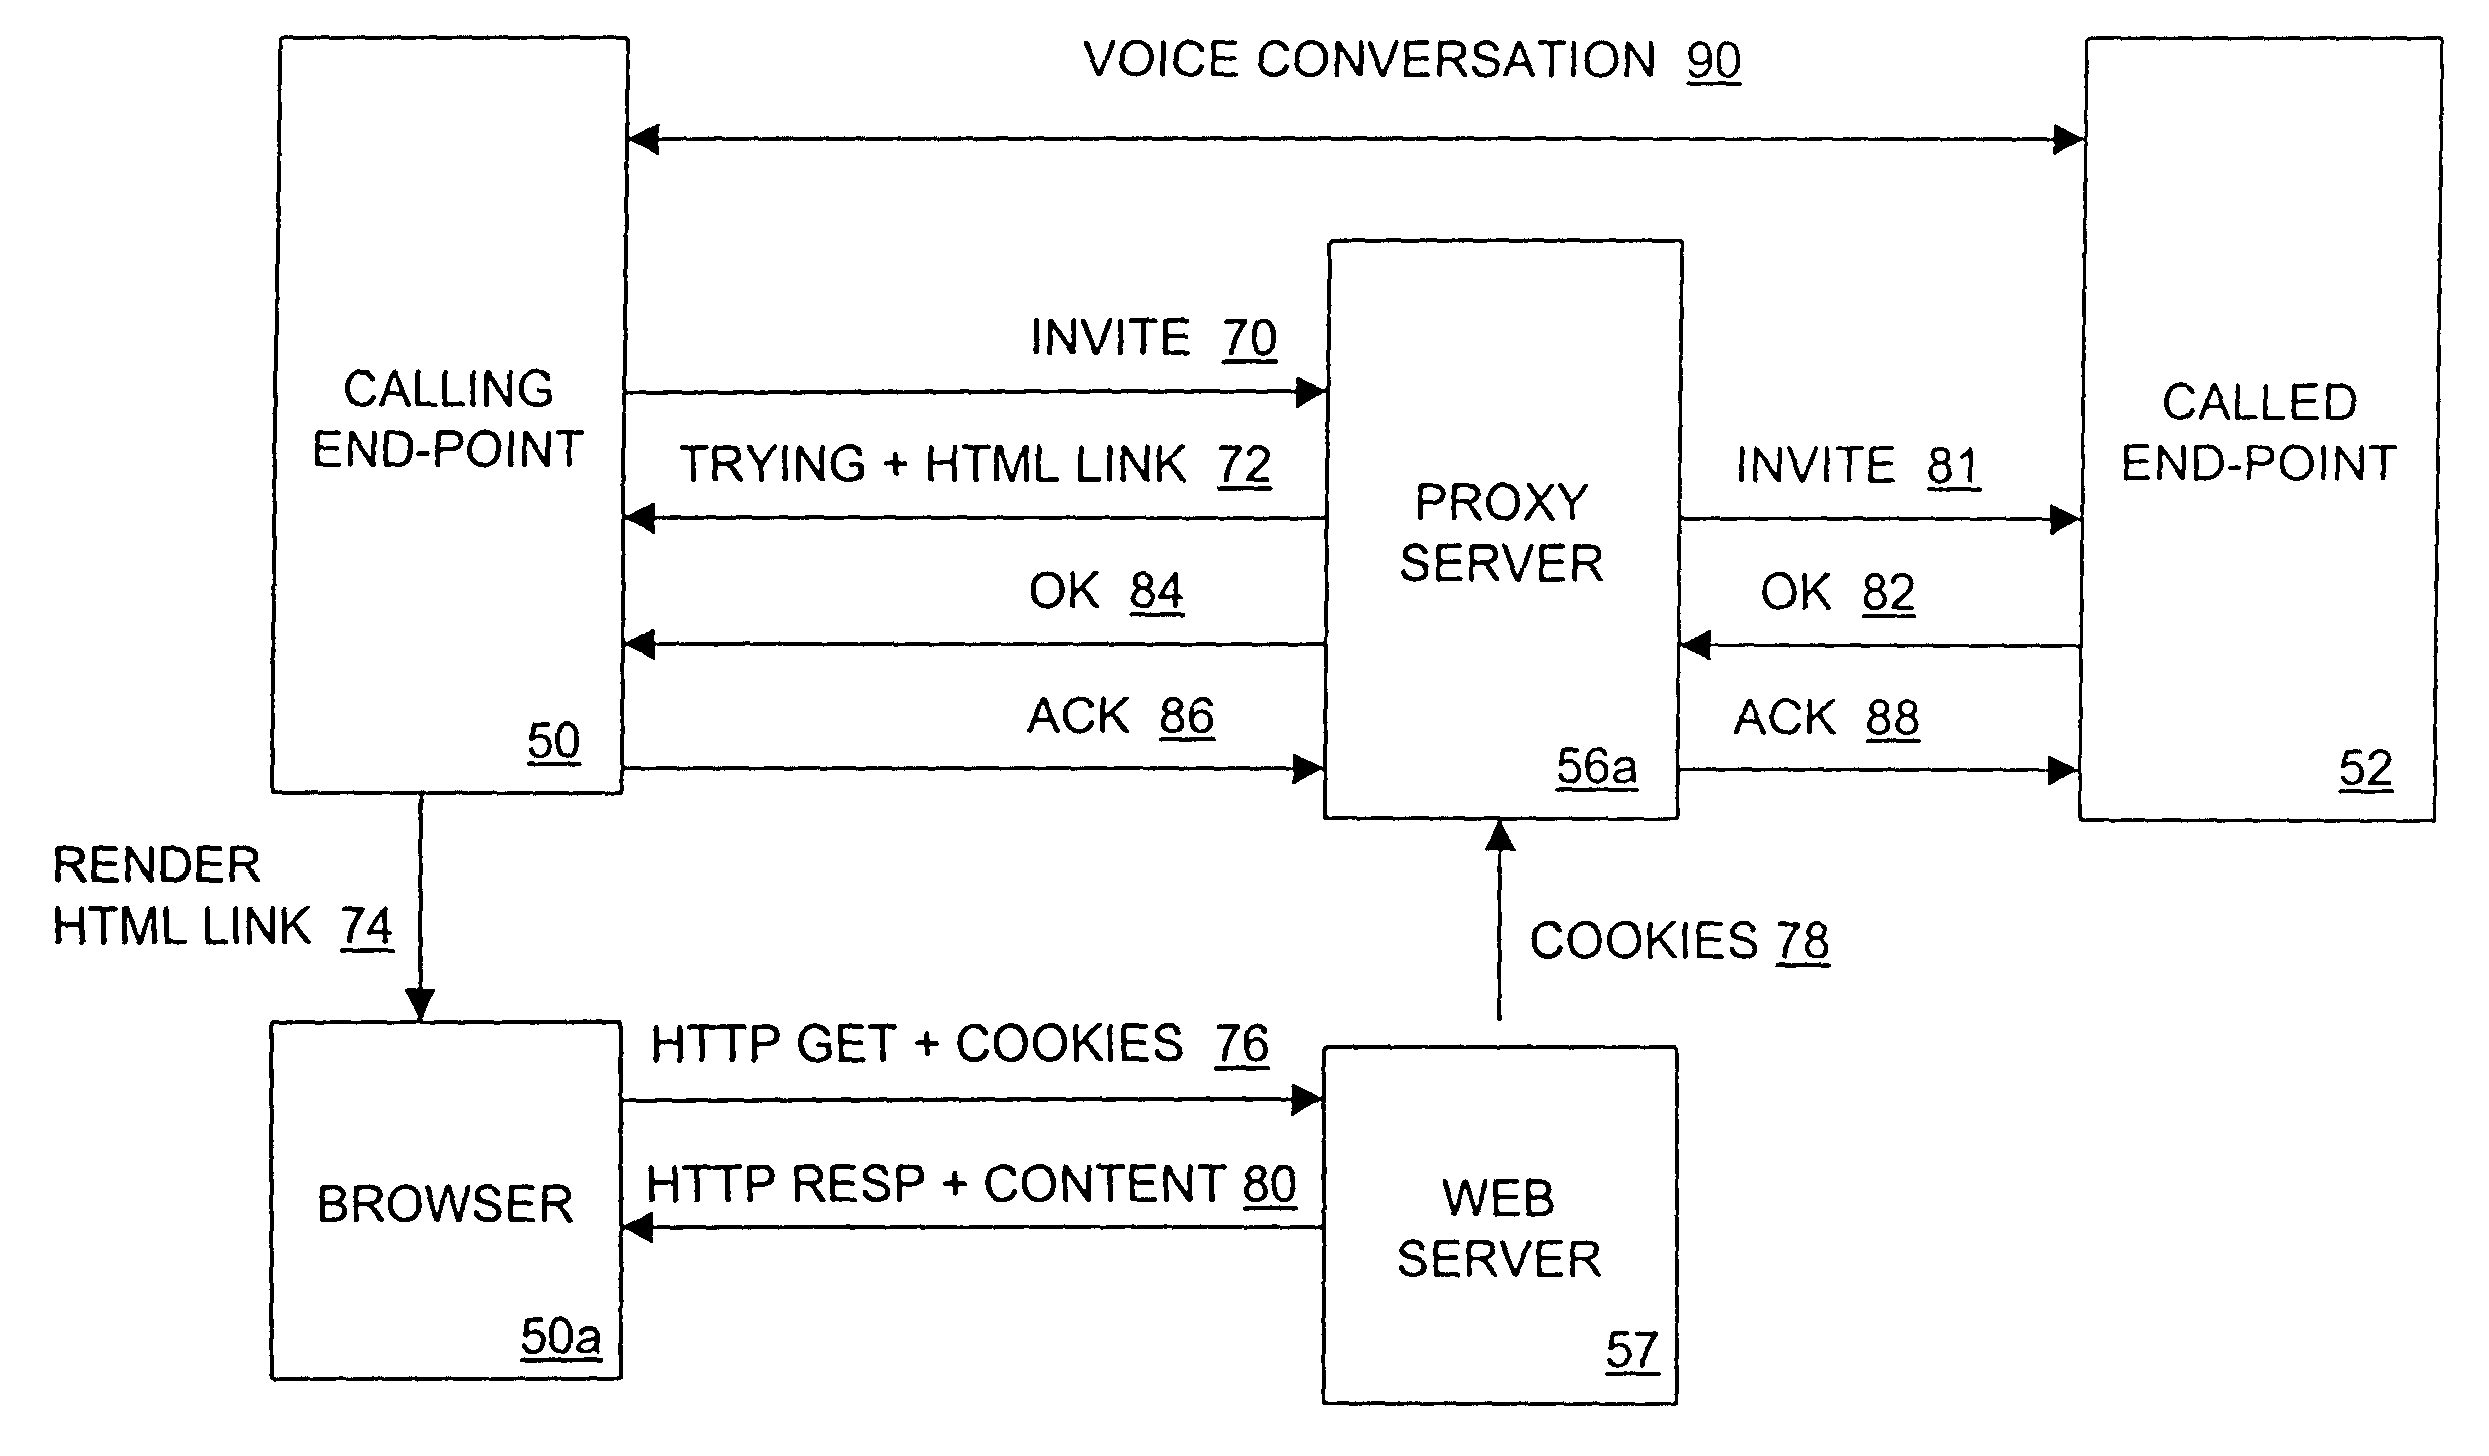 Session initiation protocol routing using voice cookies